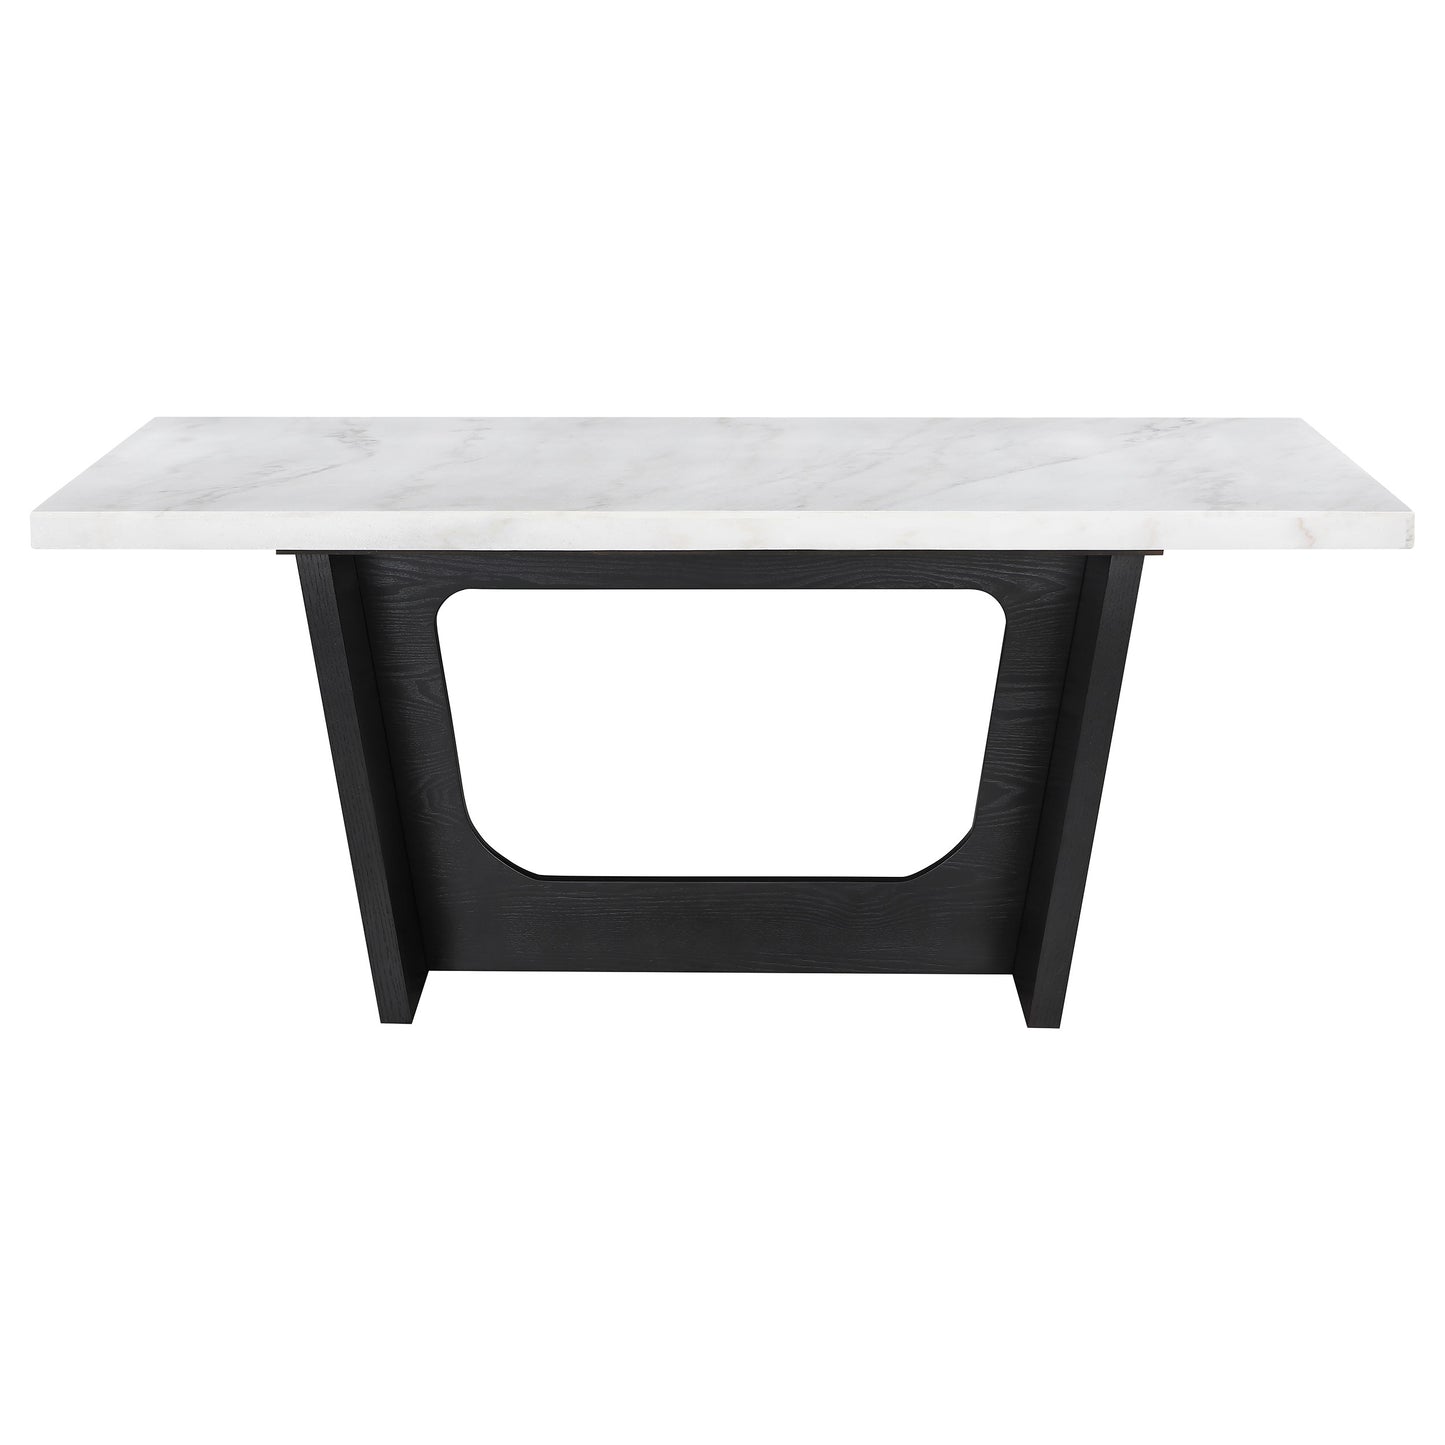 Sherry Trestle Base Marble Top Dining Table Espresso and White